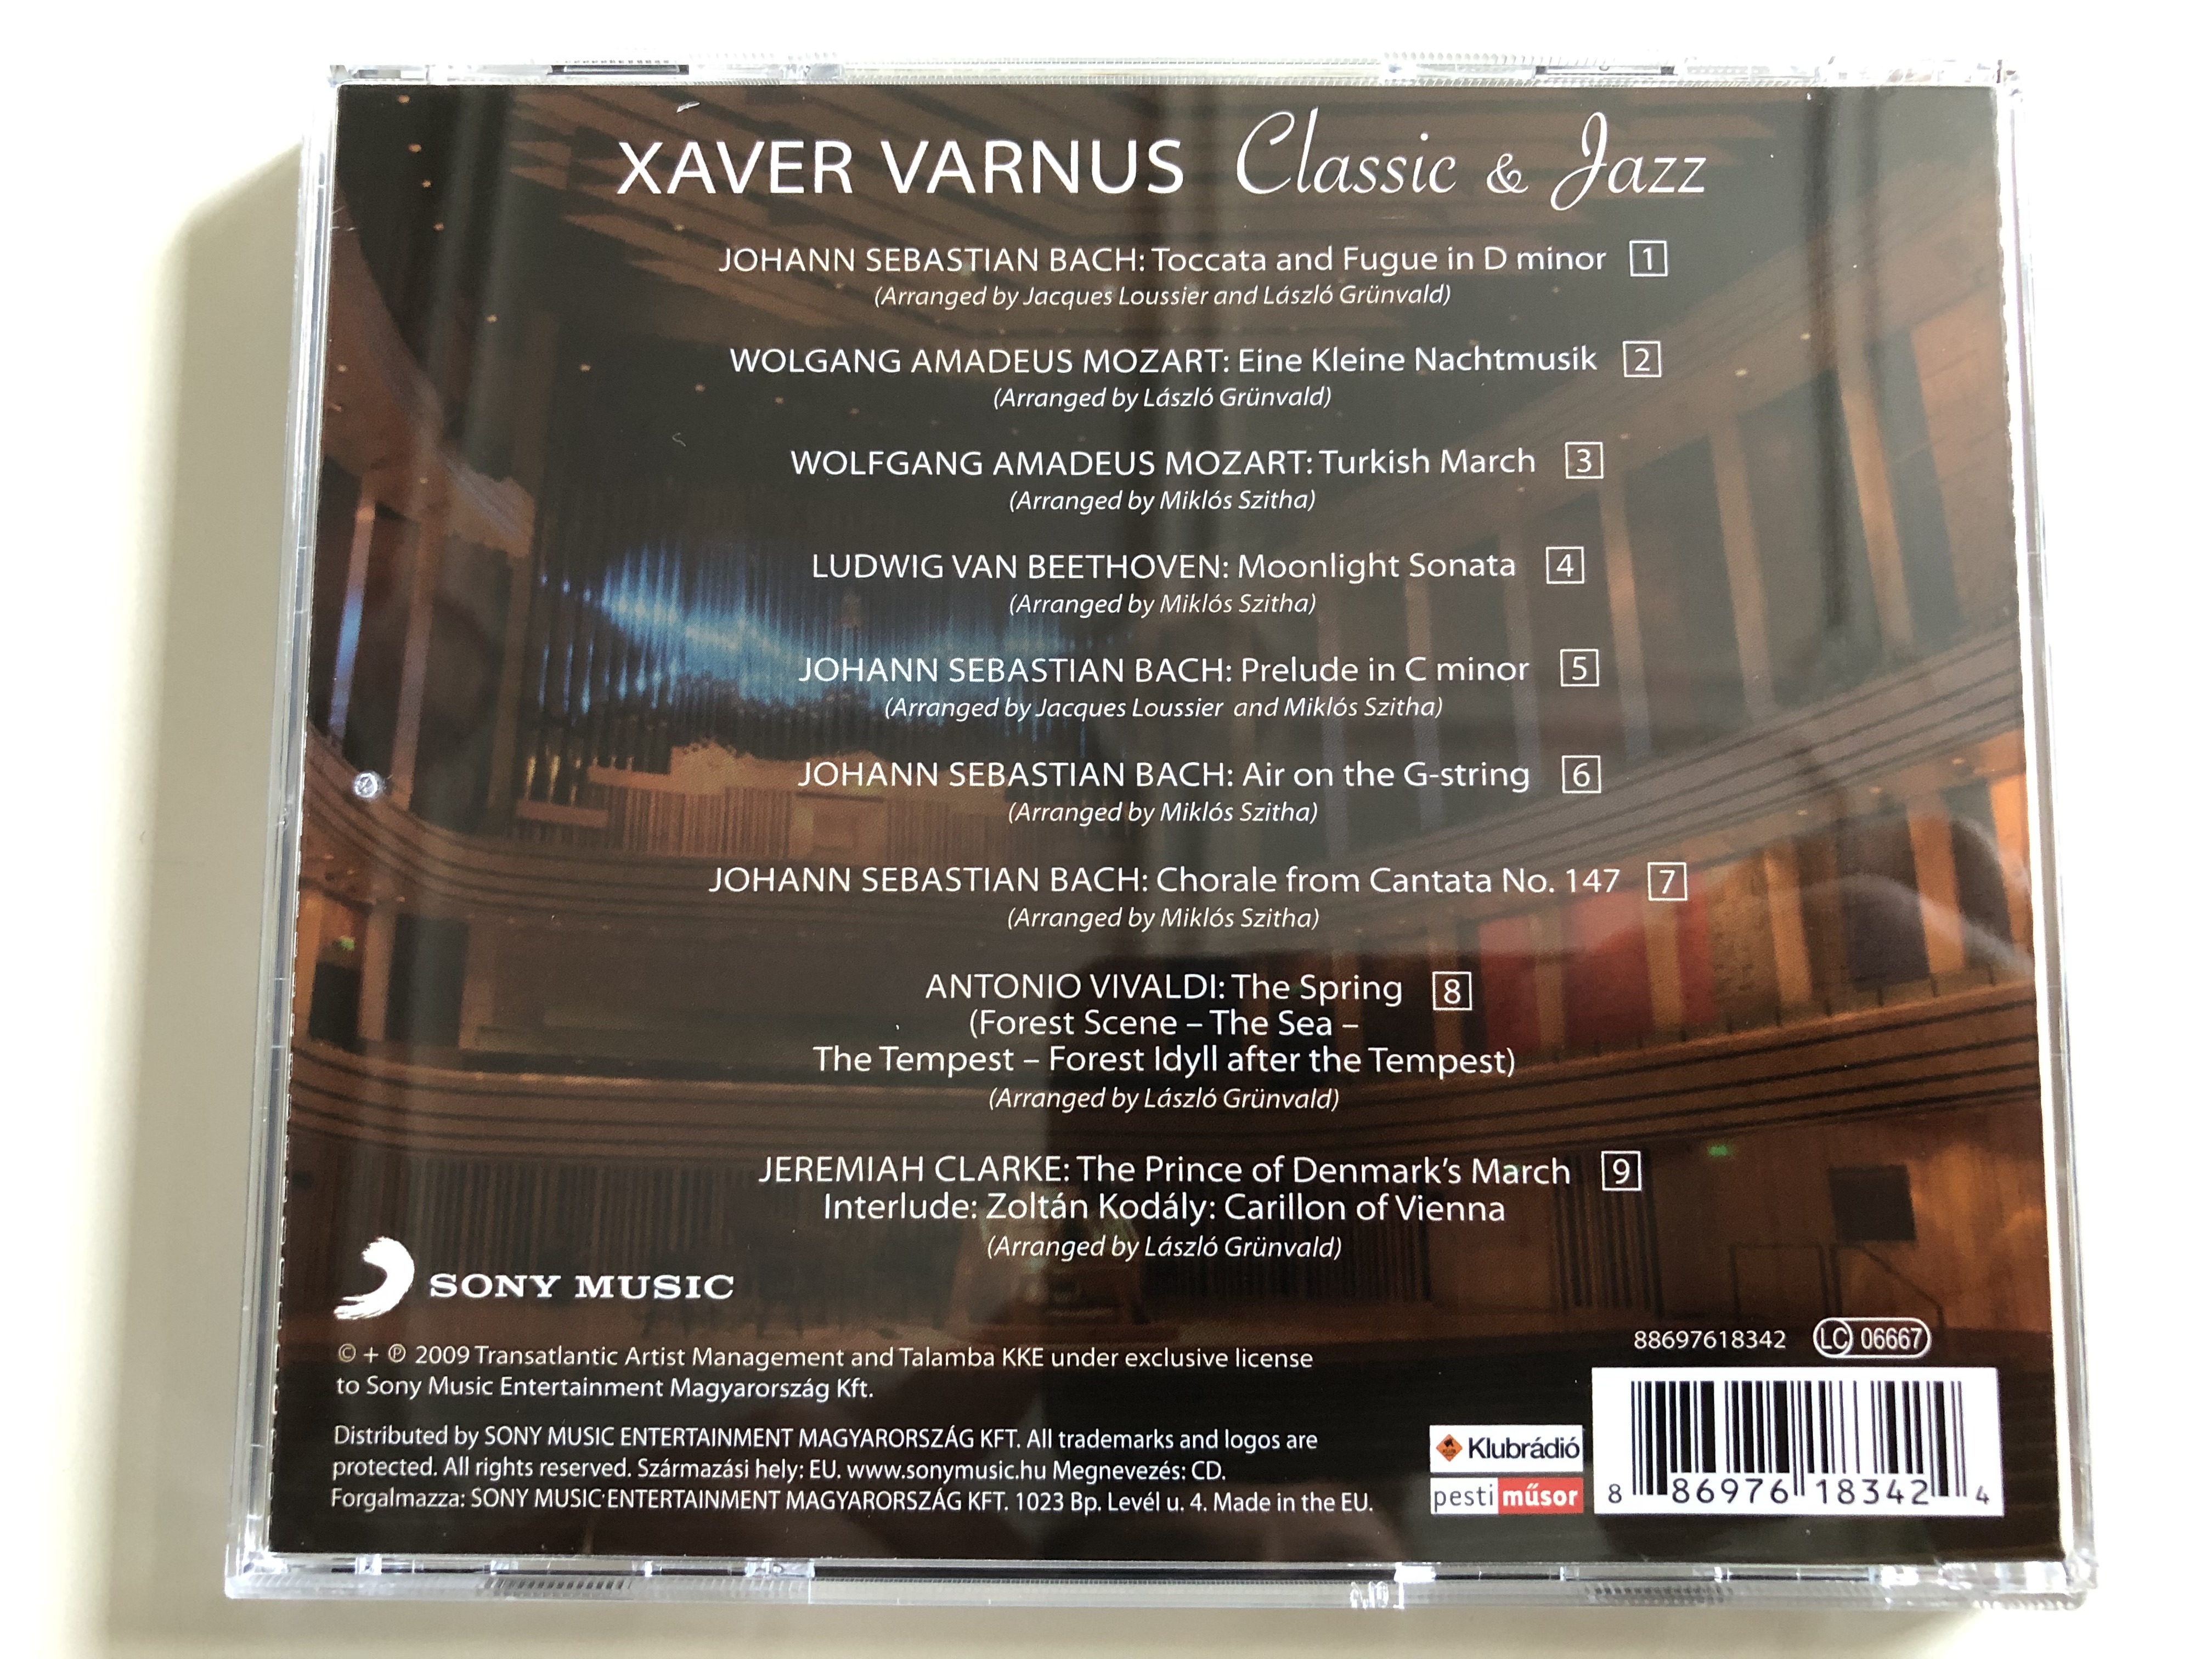 xaver-varnus-classic-jazz-the-organist-superstar-on-the-great-organ-of-the-palace-of-arts-of-budapest-talamba-percussion-group-sony-music-audio-cd-2009-8-.jpg